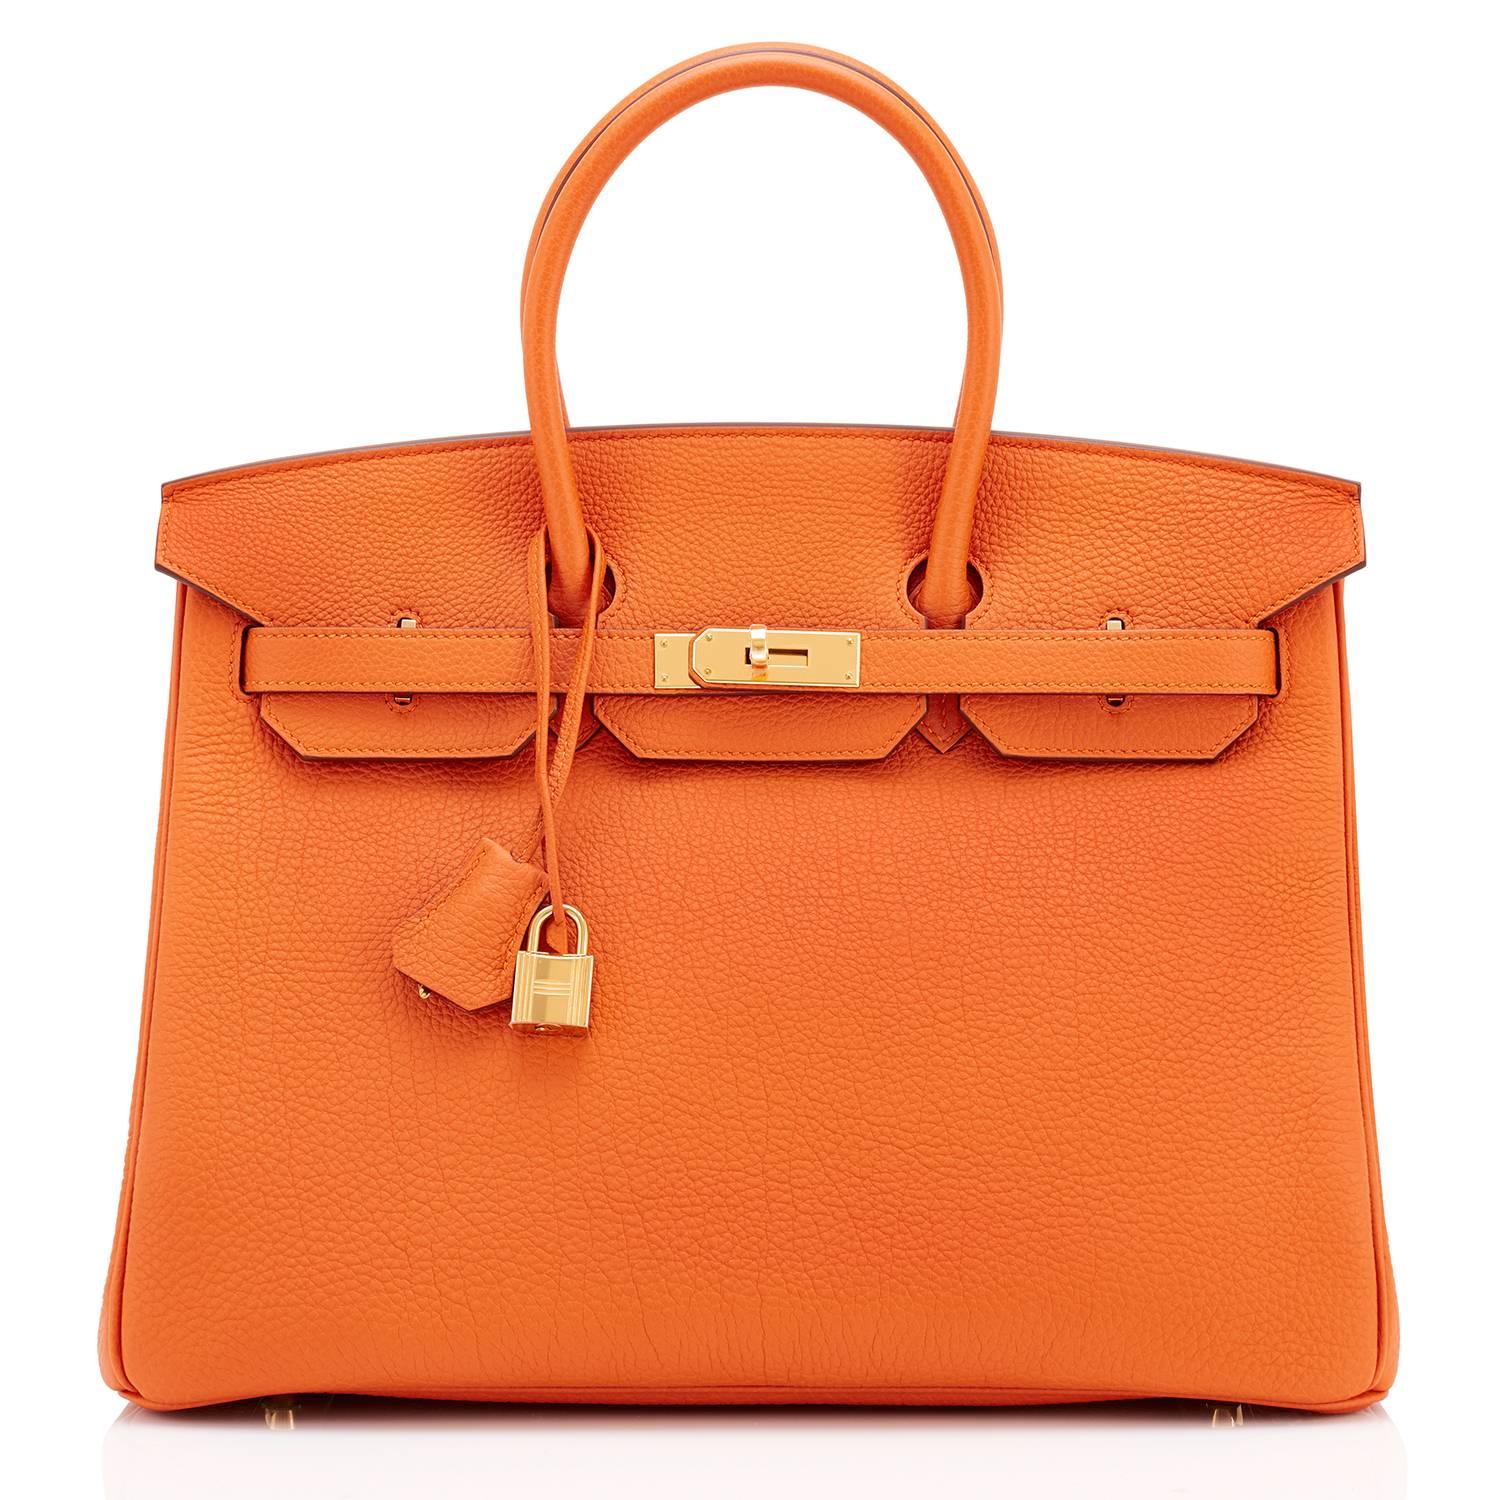 Hermes Classic Orange Togo 35cm Birkin Bag Gold Hardware 
Extremely rare find in New or Never Worn condition (with plastic on hardware). 
Perfect gift!  Comes in full set with lock, keys, clochette, sleeper, raincoat, and Hermes box. 
This is the